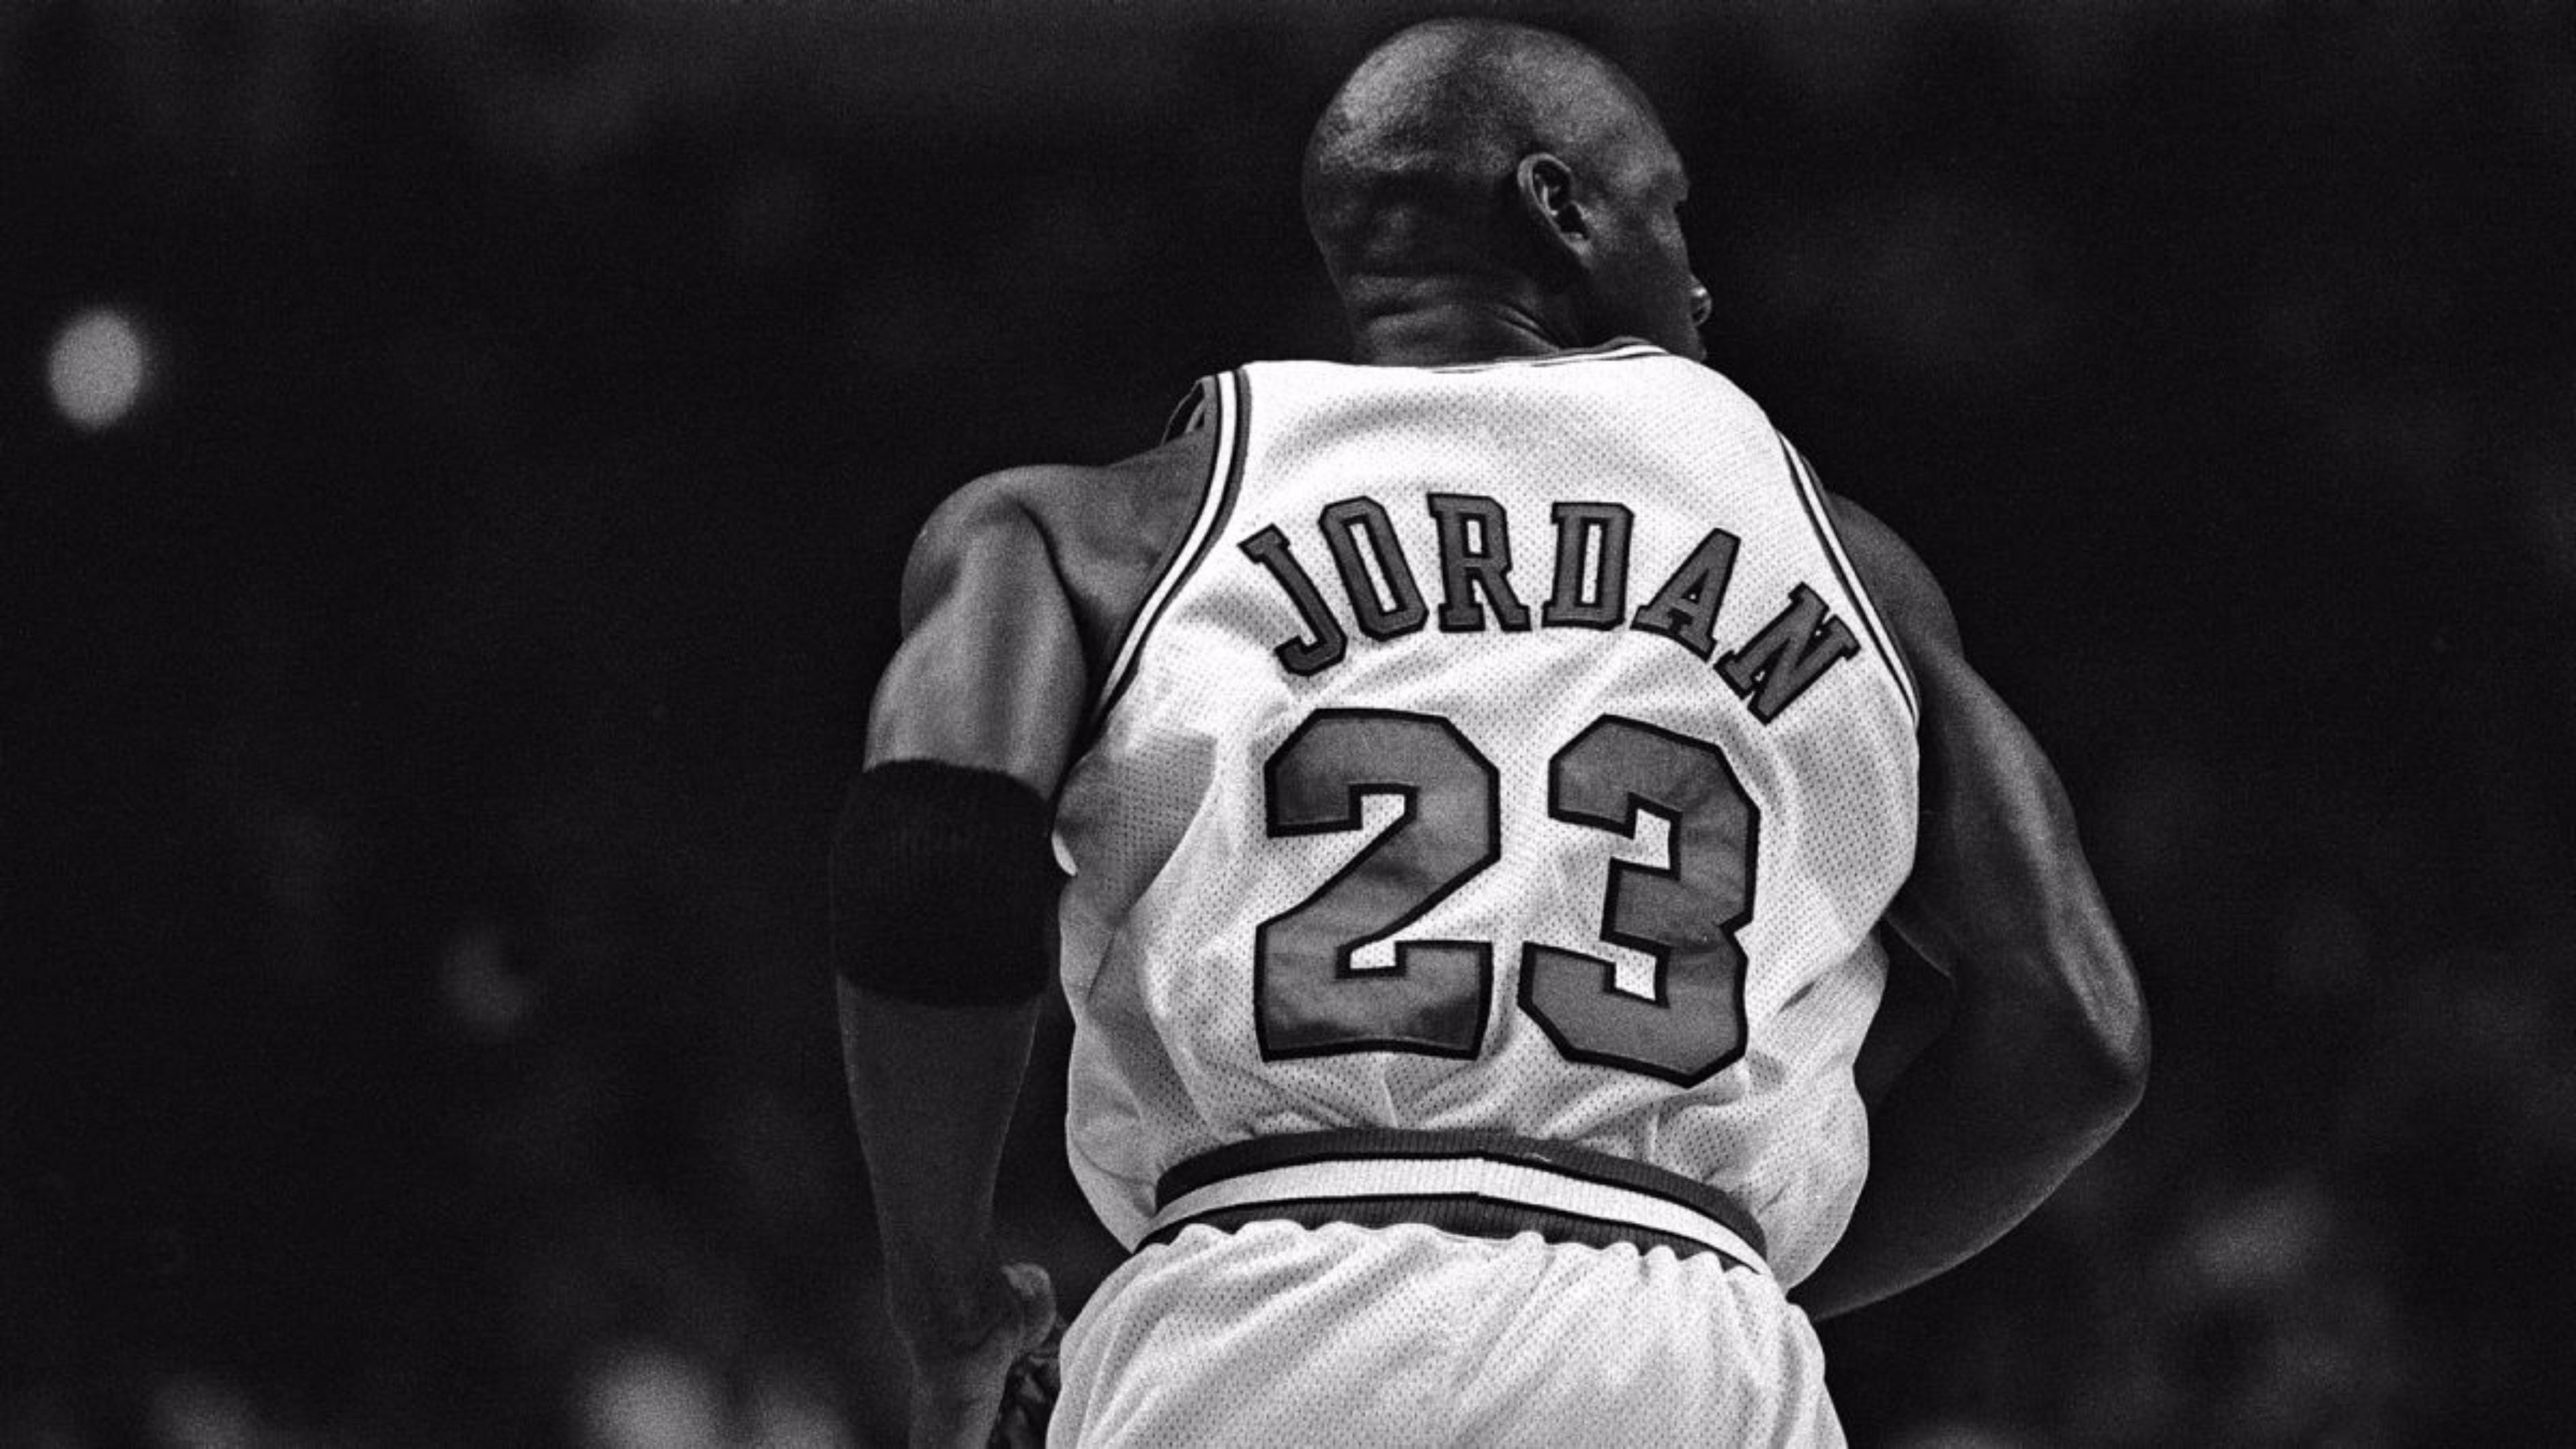 The most iconic number in NBA history is 23, worn by Michael Jordan. - Michael Jordan